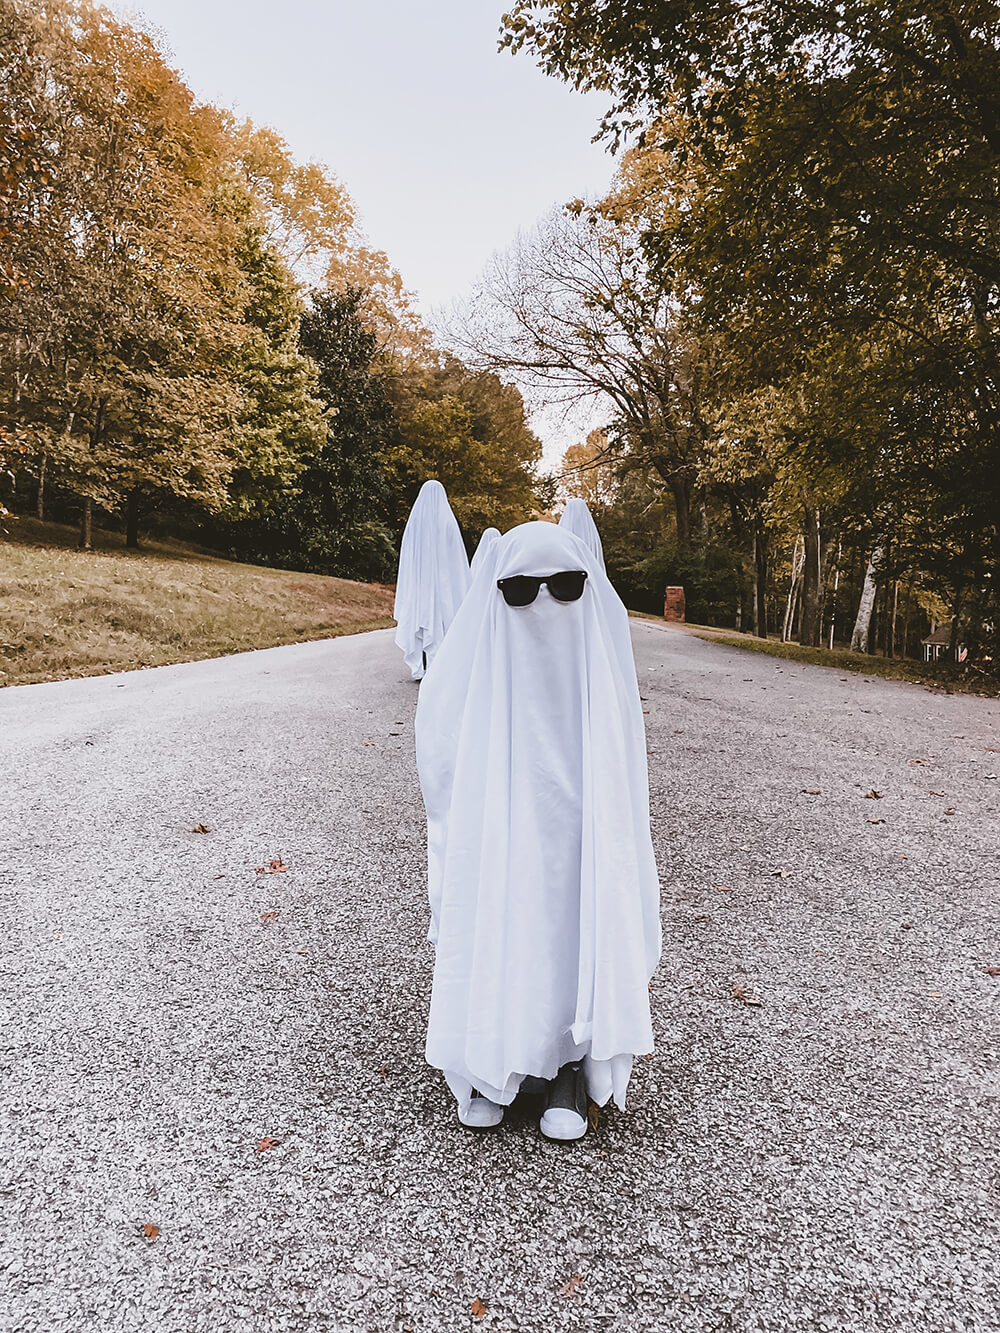 Need an easy DIY Halloween Costume Idea? I am sharing our take on the classic ghost costume for this year's costumes for the kids. We had so much fun with this one! Catch it now on KaraLayne.com.